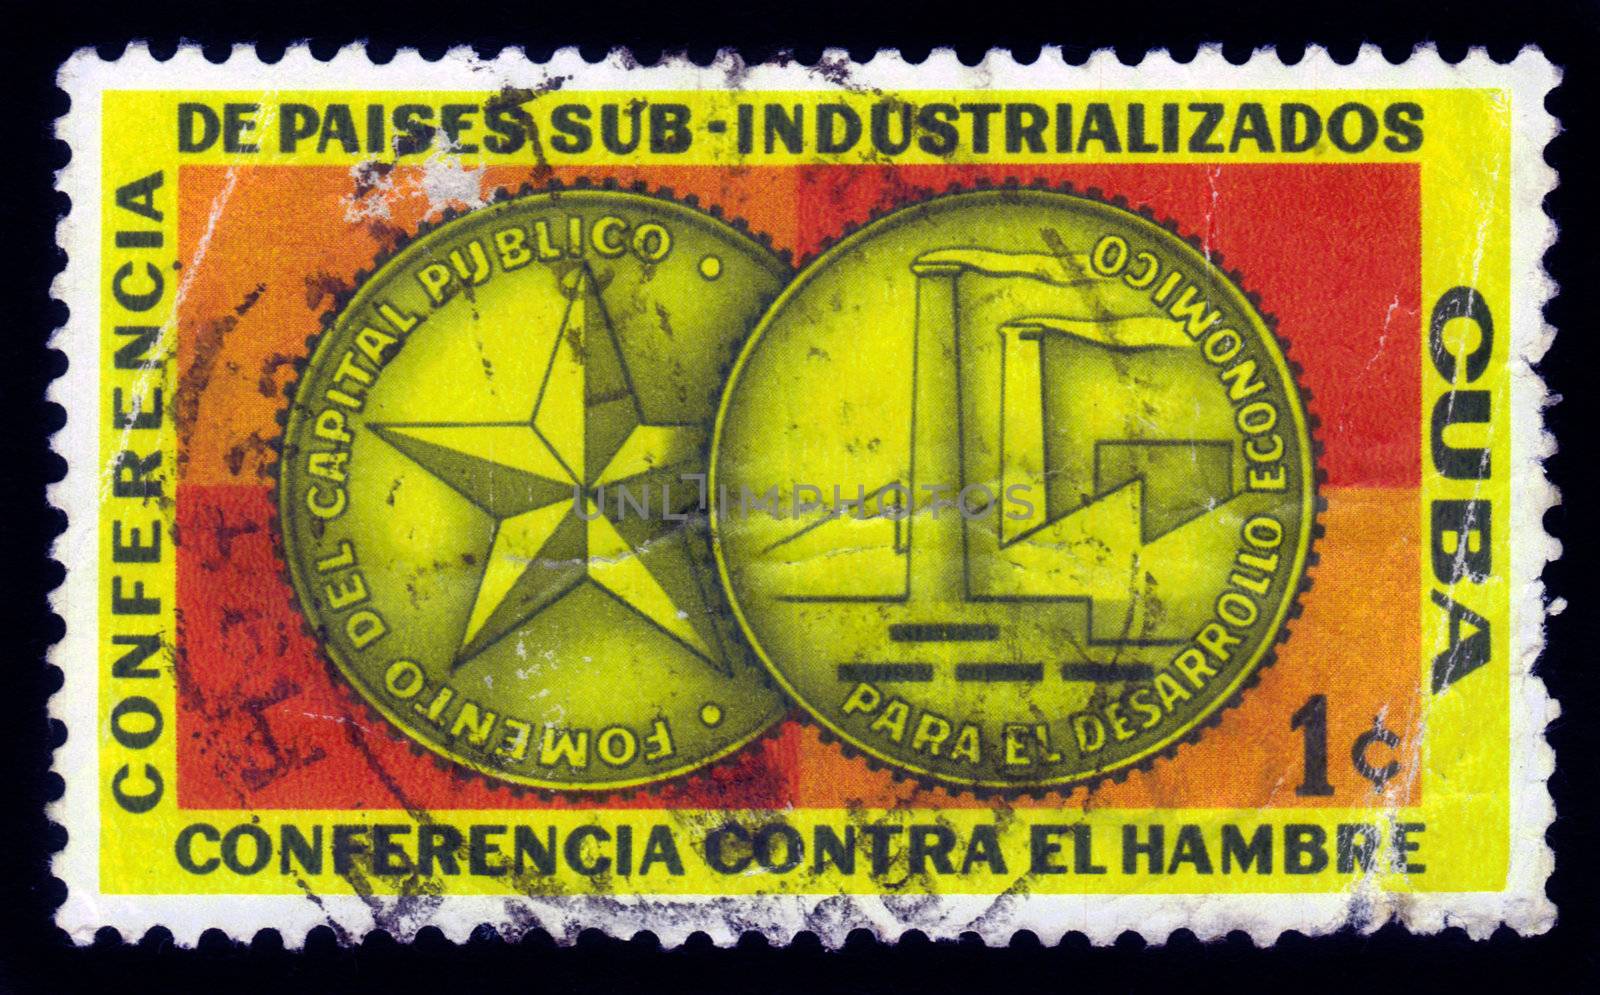 medal dedicated to sub-industrialized countries conference in Havana by irisphoto4